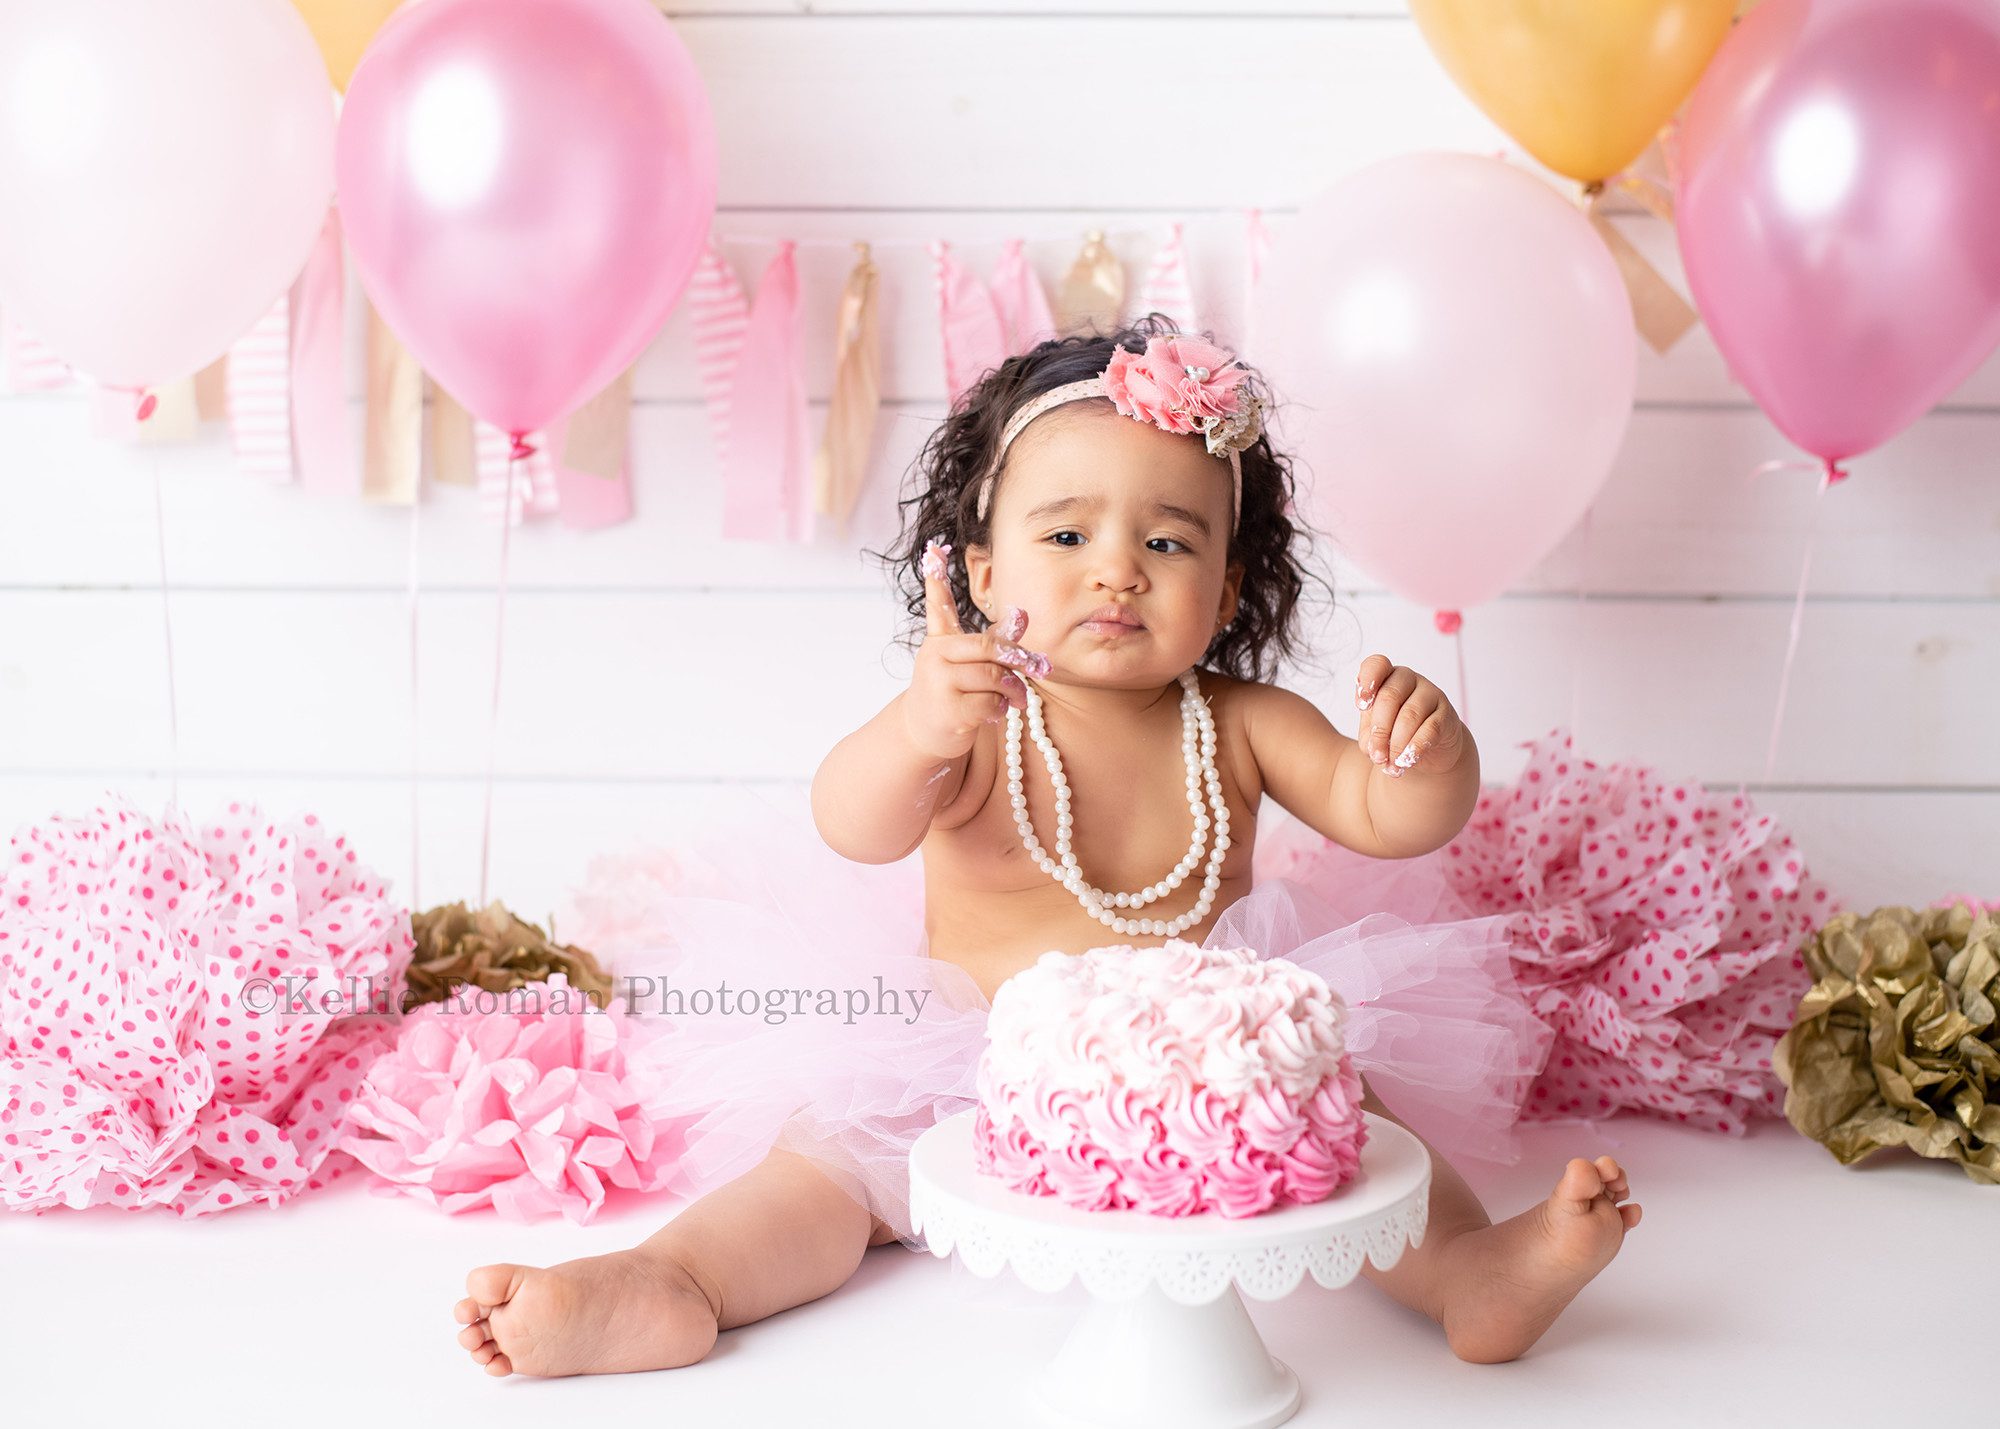 milwaukee cake smash photographer a one year old girl is having her milestone session in a milwaukee photo studio in greendale Wisconsin. The girl is wearing a pink tutu with pearls and is sitting behind a pink swirl cake thats resting on a white cake stand there are pink and gold balloons pink pom poms and a pink and gold banner behind her